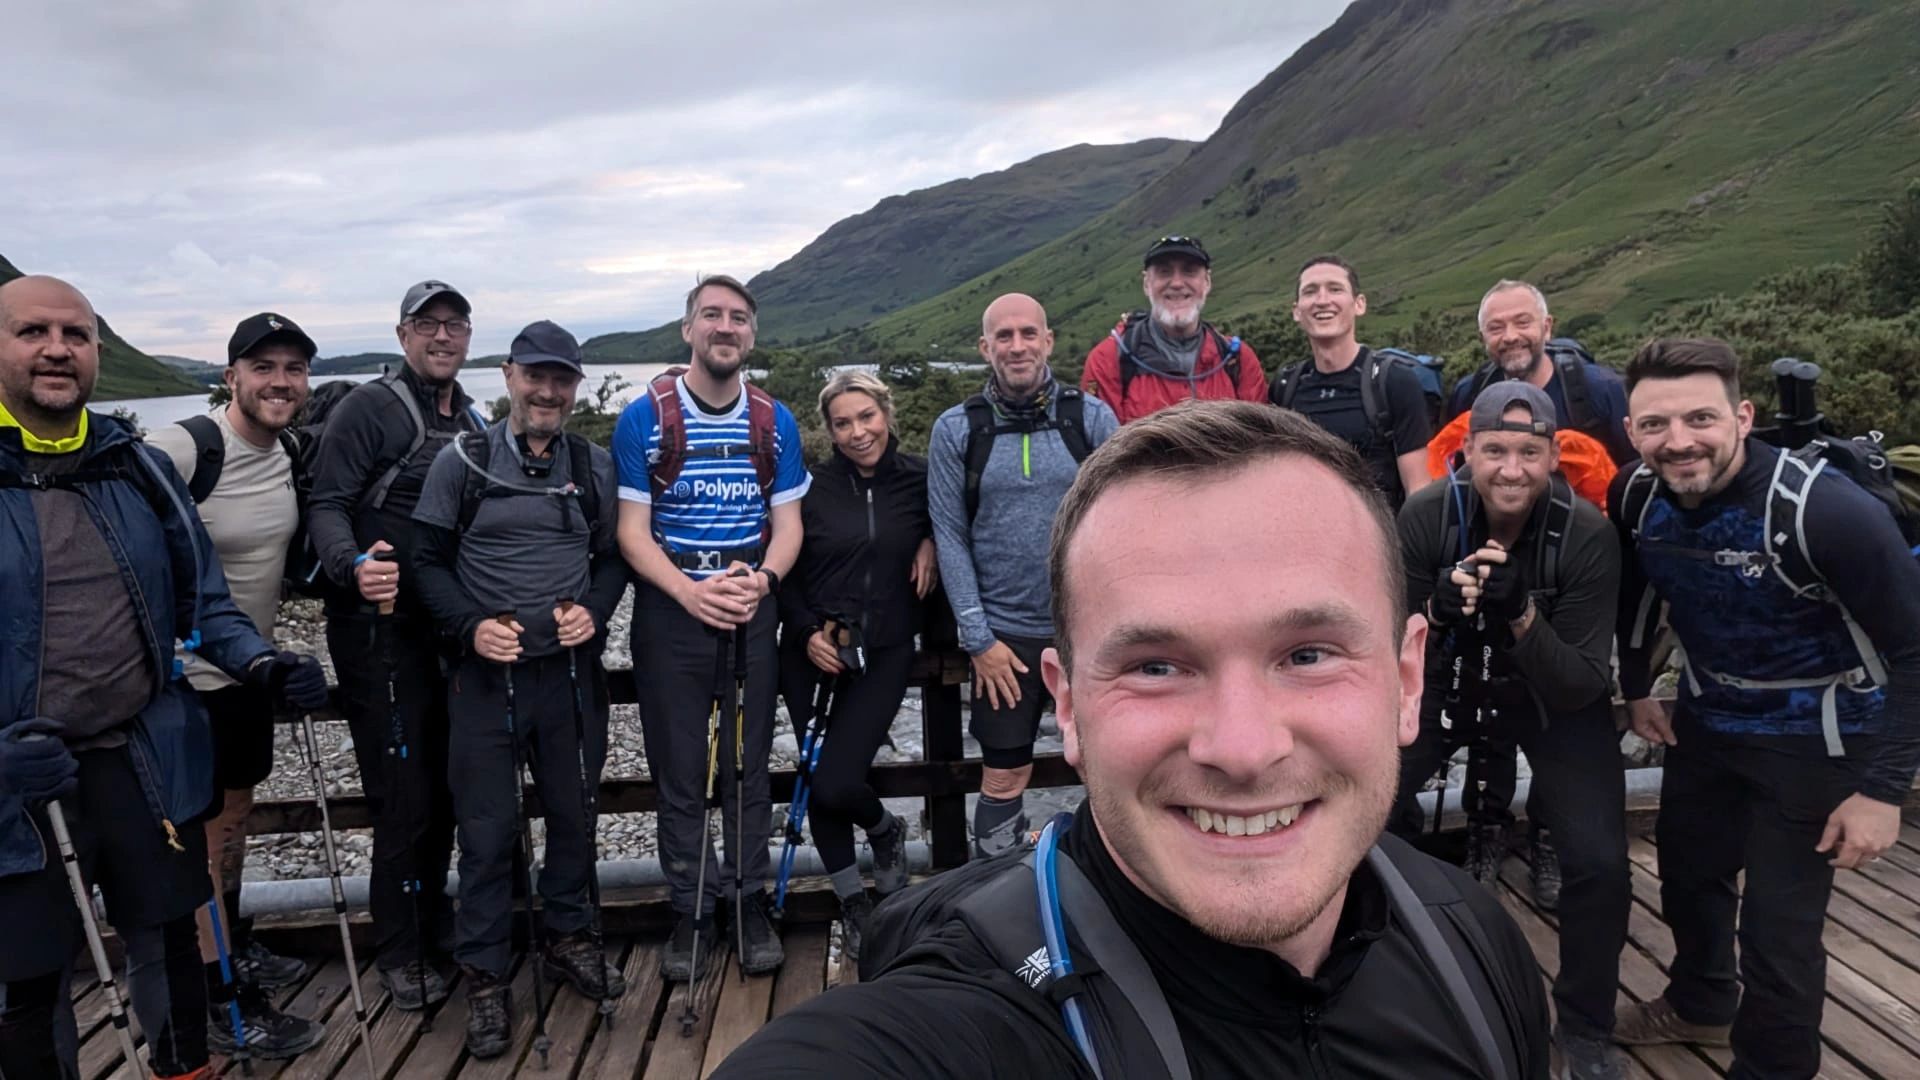 The team shortly before they started Scafell Pike.